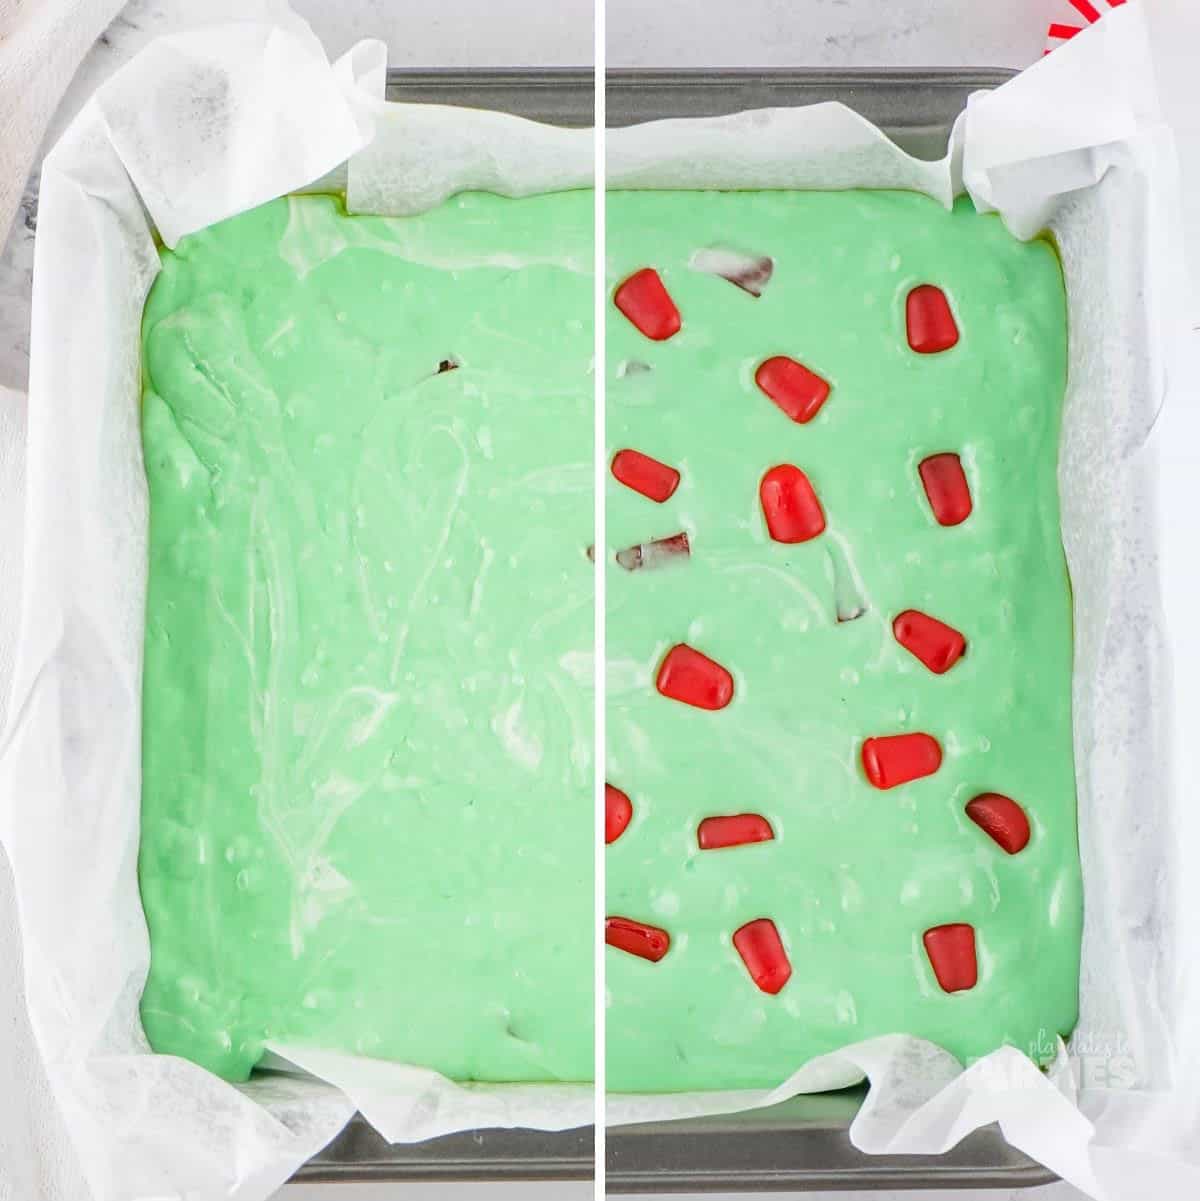 Green nougat batter in a prepared pan before and after topping with red gumdrops.